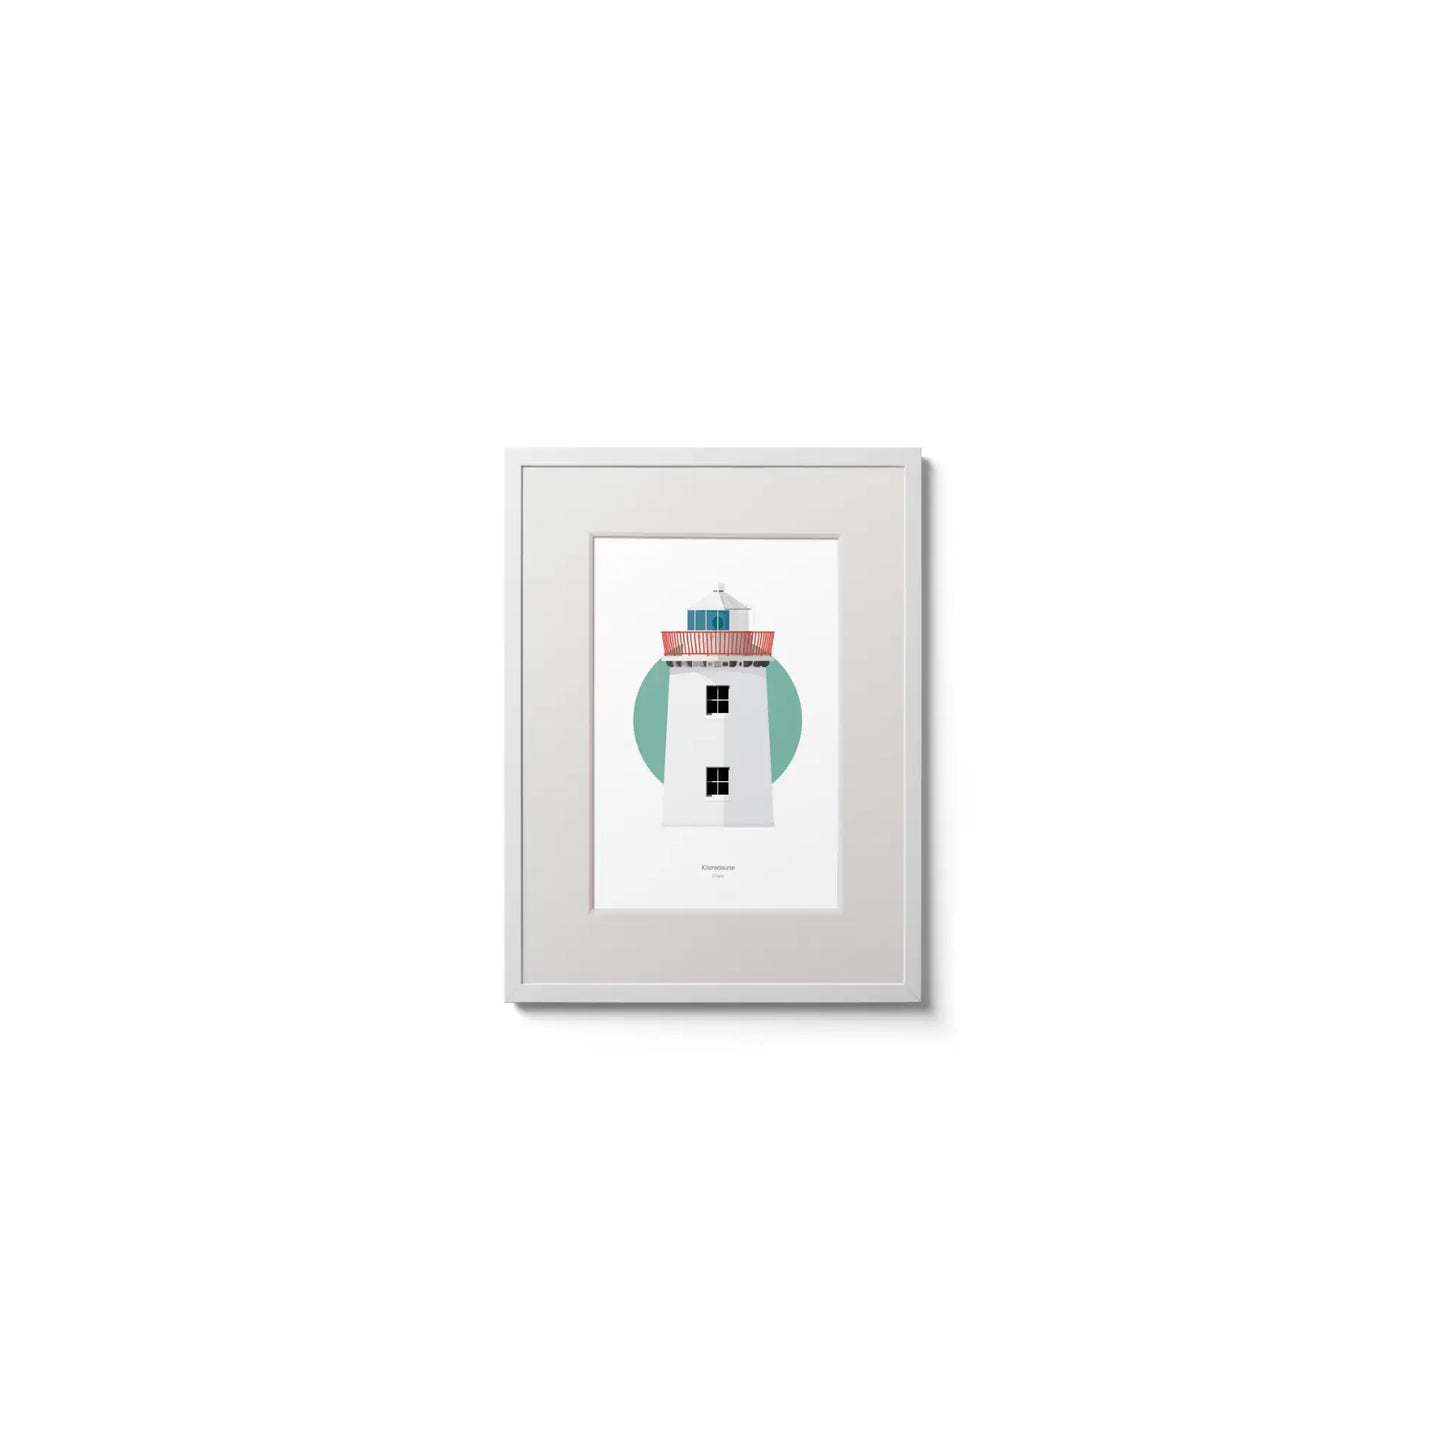 Illustration of Kilcredaun lighthouse on a white background inside light blue square,  in a white frame measuring 15x20cm.